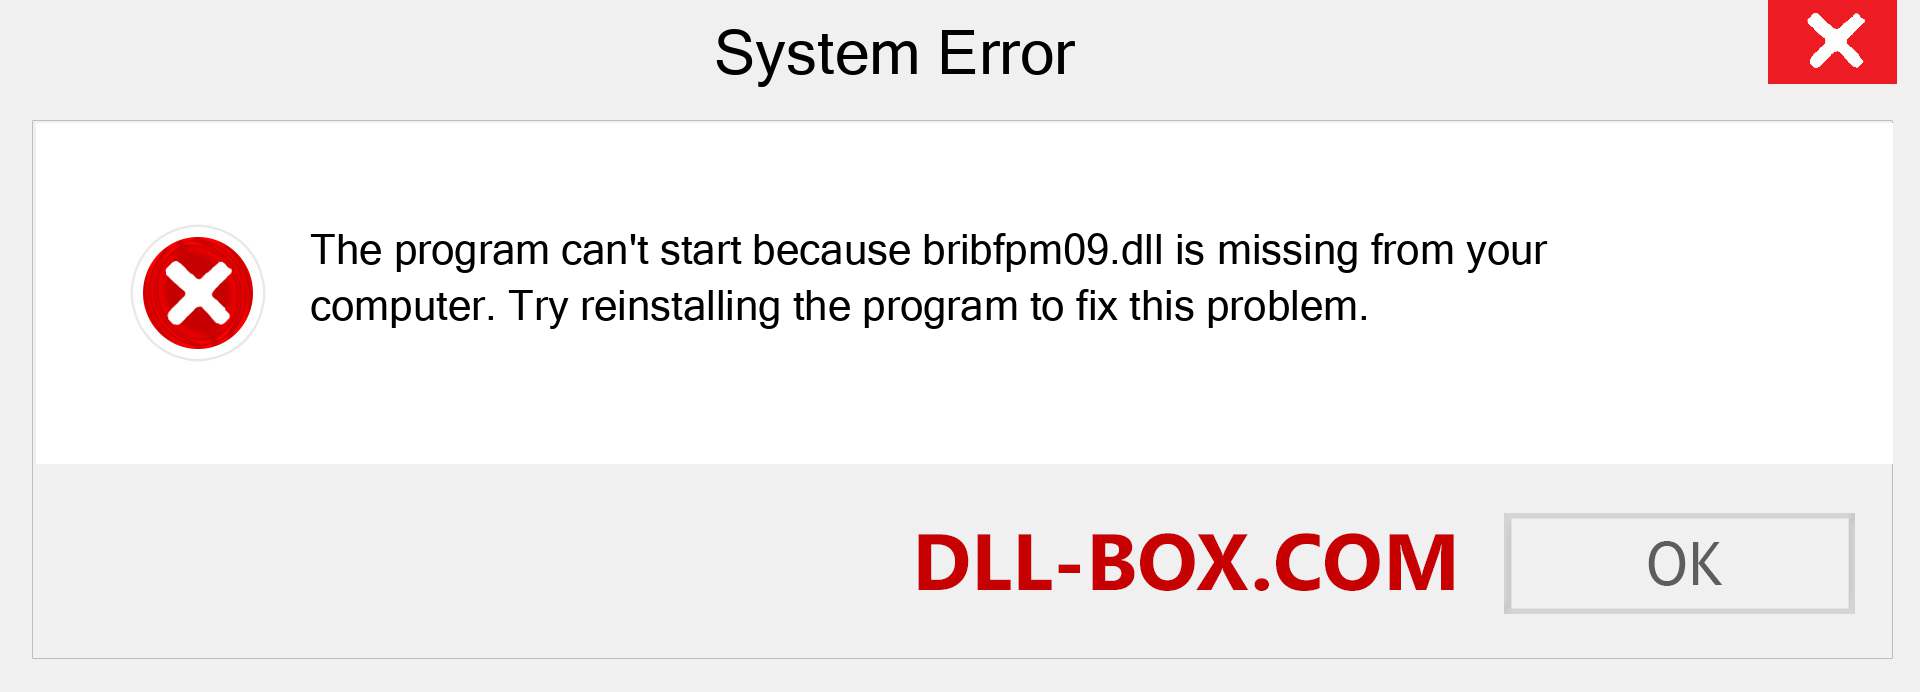  bribfpm09.dll file is missing?. Download for Windows 7, 8, 10 - Fix  bribfpm09 dll Missing Error on Windows, photos, images